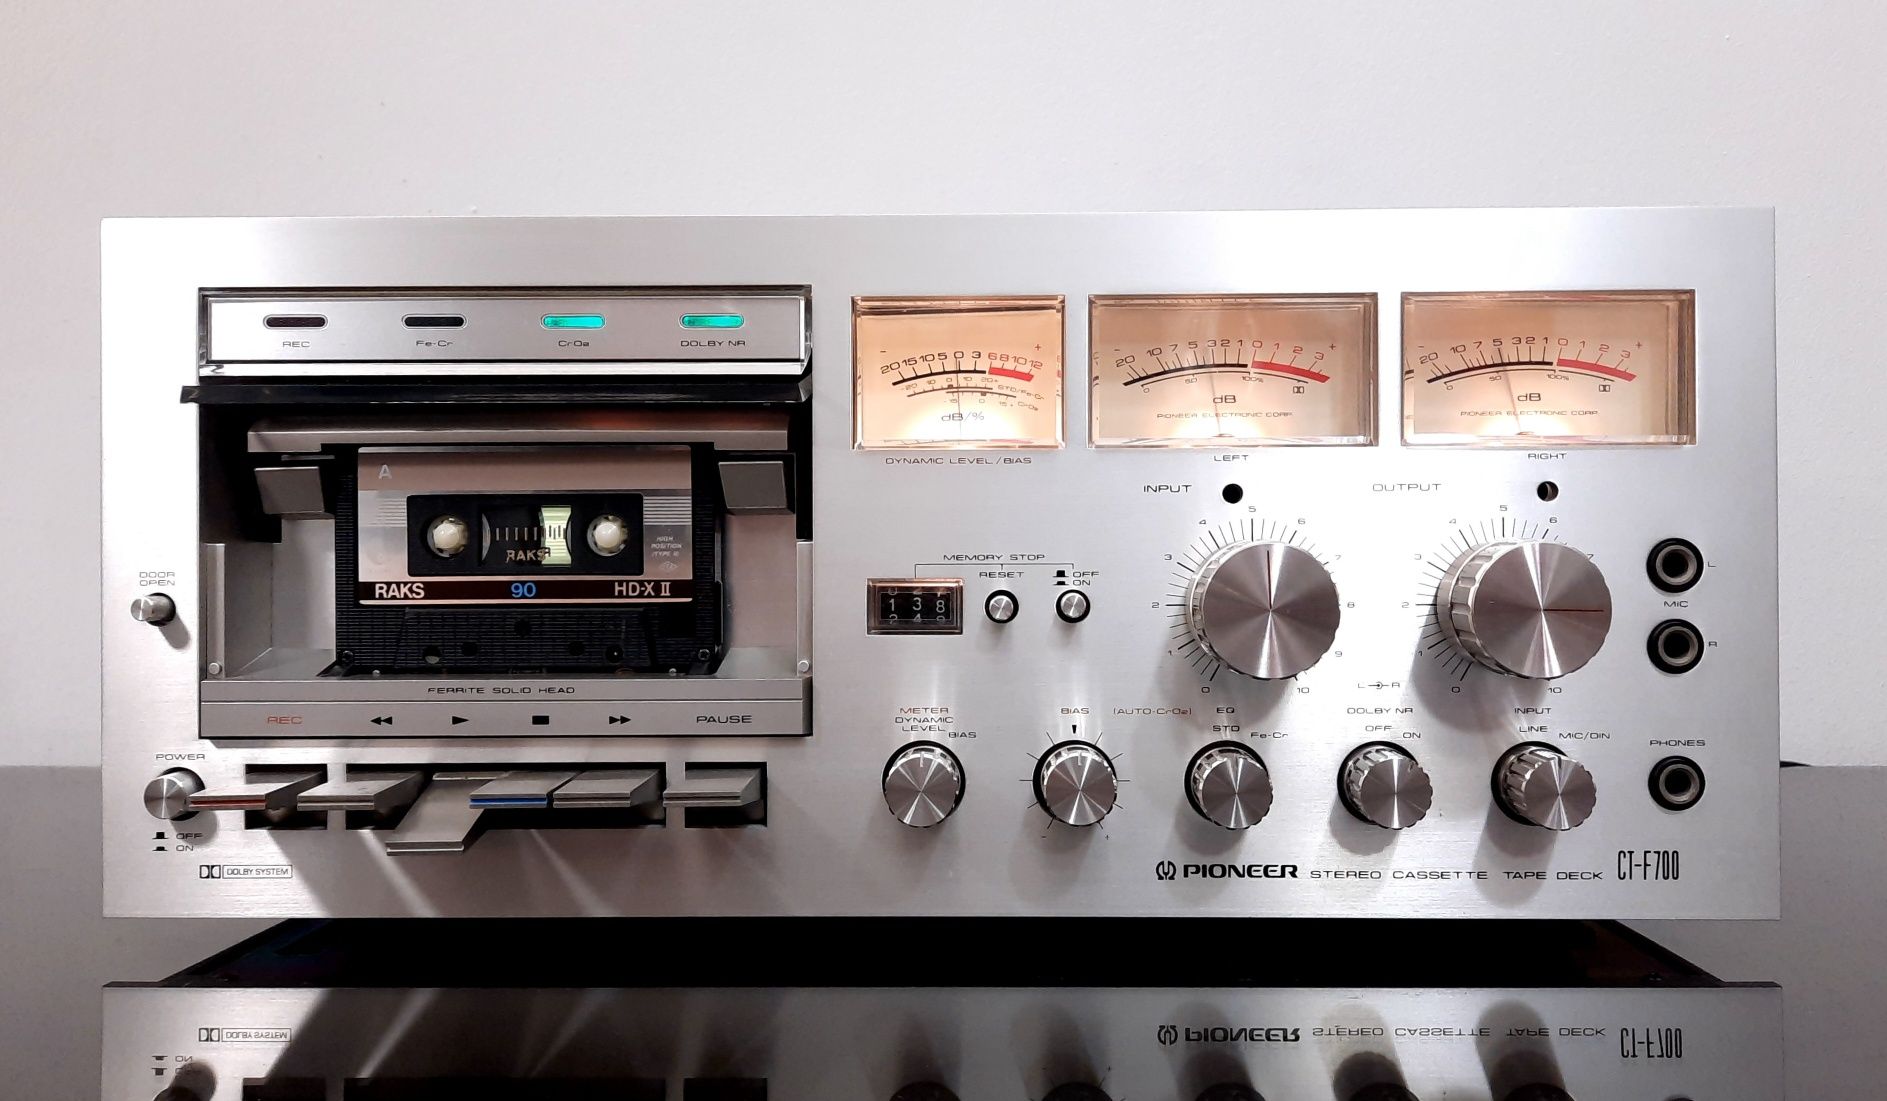 PIONEER CT-F700 Stereo Cassette Tape Deck | Impecabil